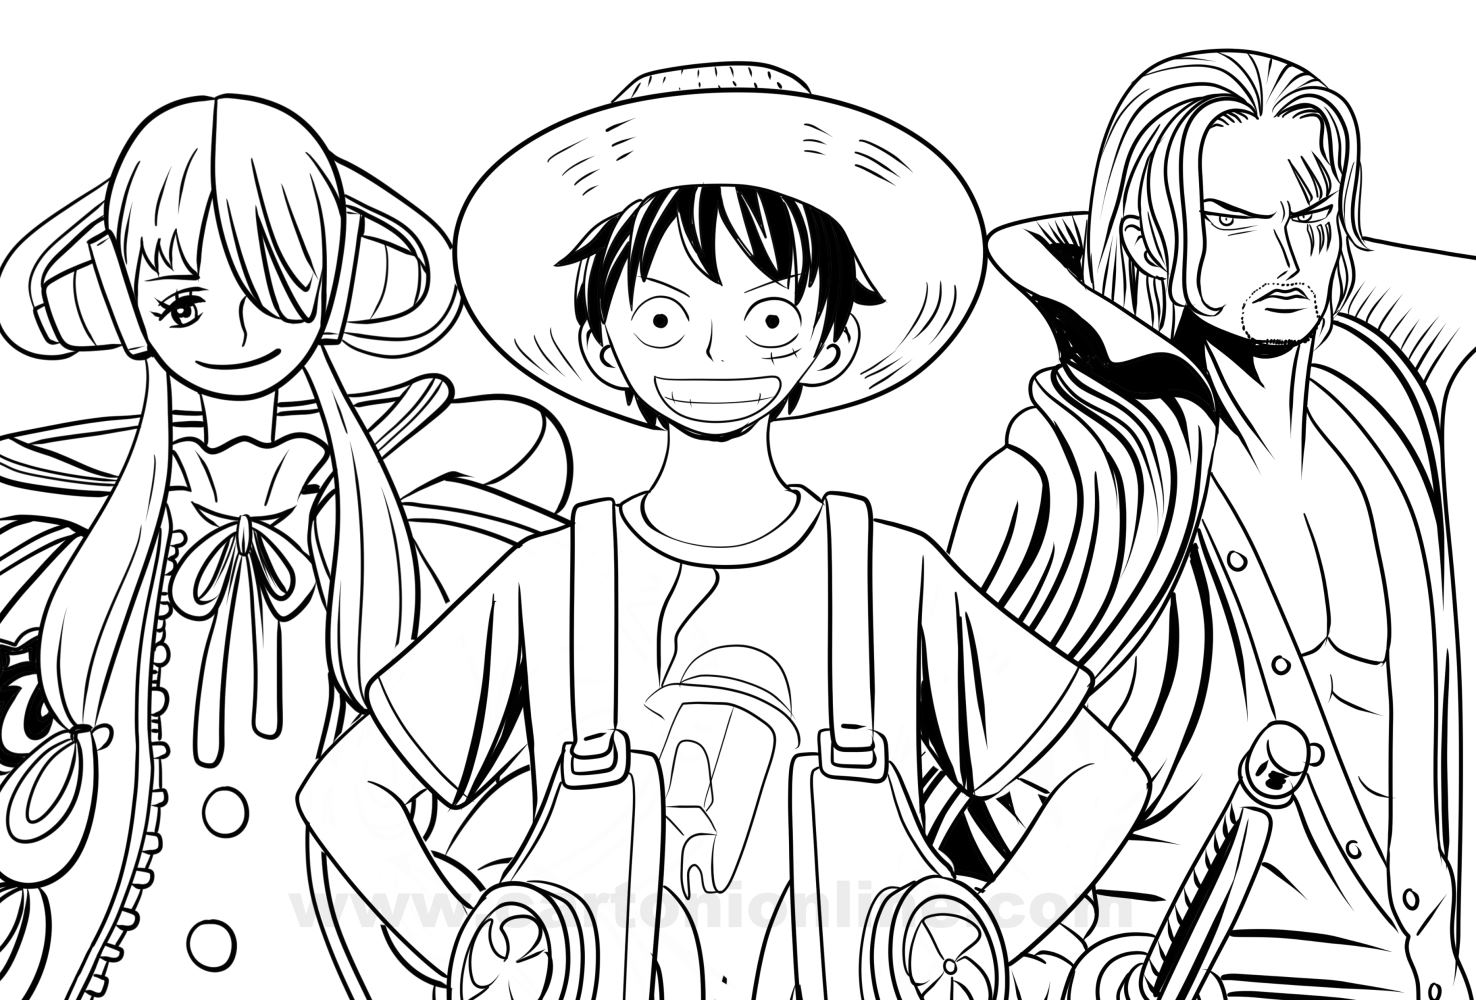 Drawing One Piece Film: Red from One Piece Film: Red to print and color